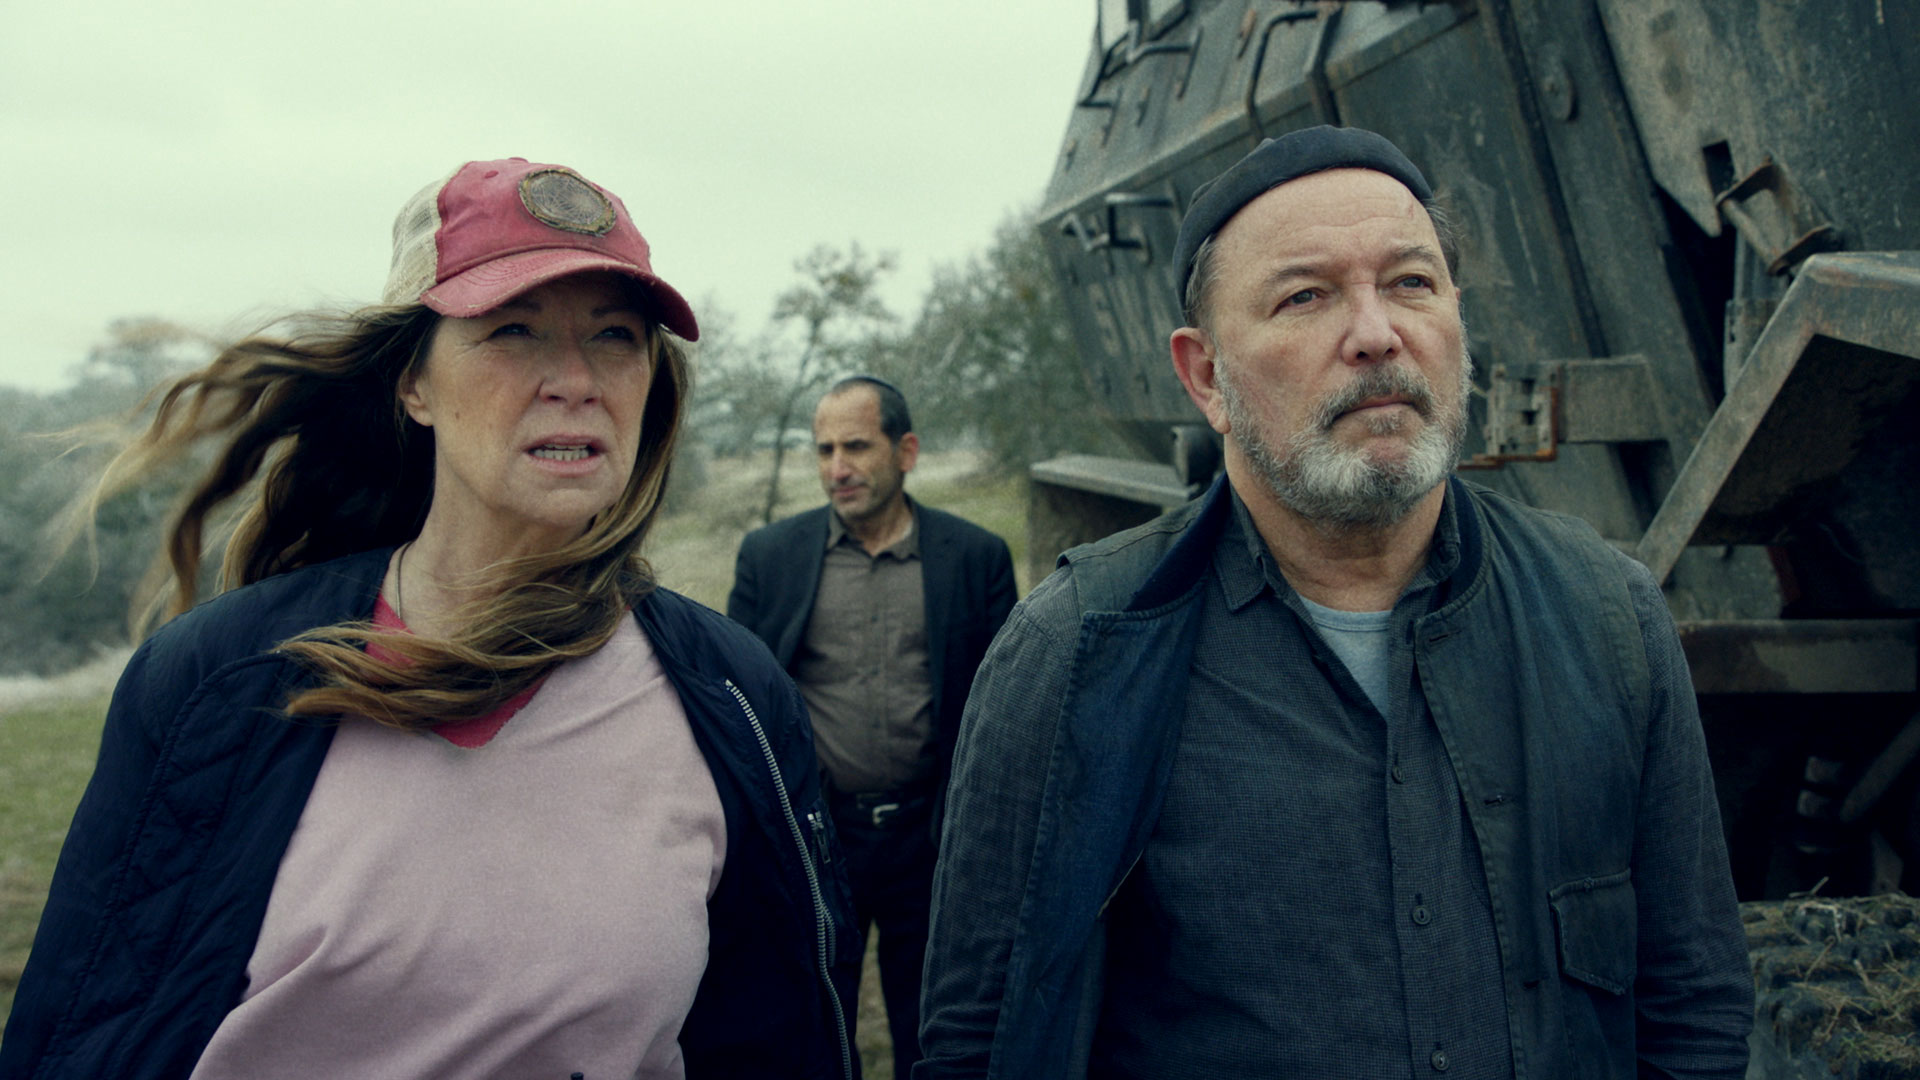 (SPOILERS) Inside Fear the Walking Dead Season 6: Cast and Creators on the Journey Through the Submarine